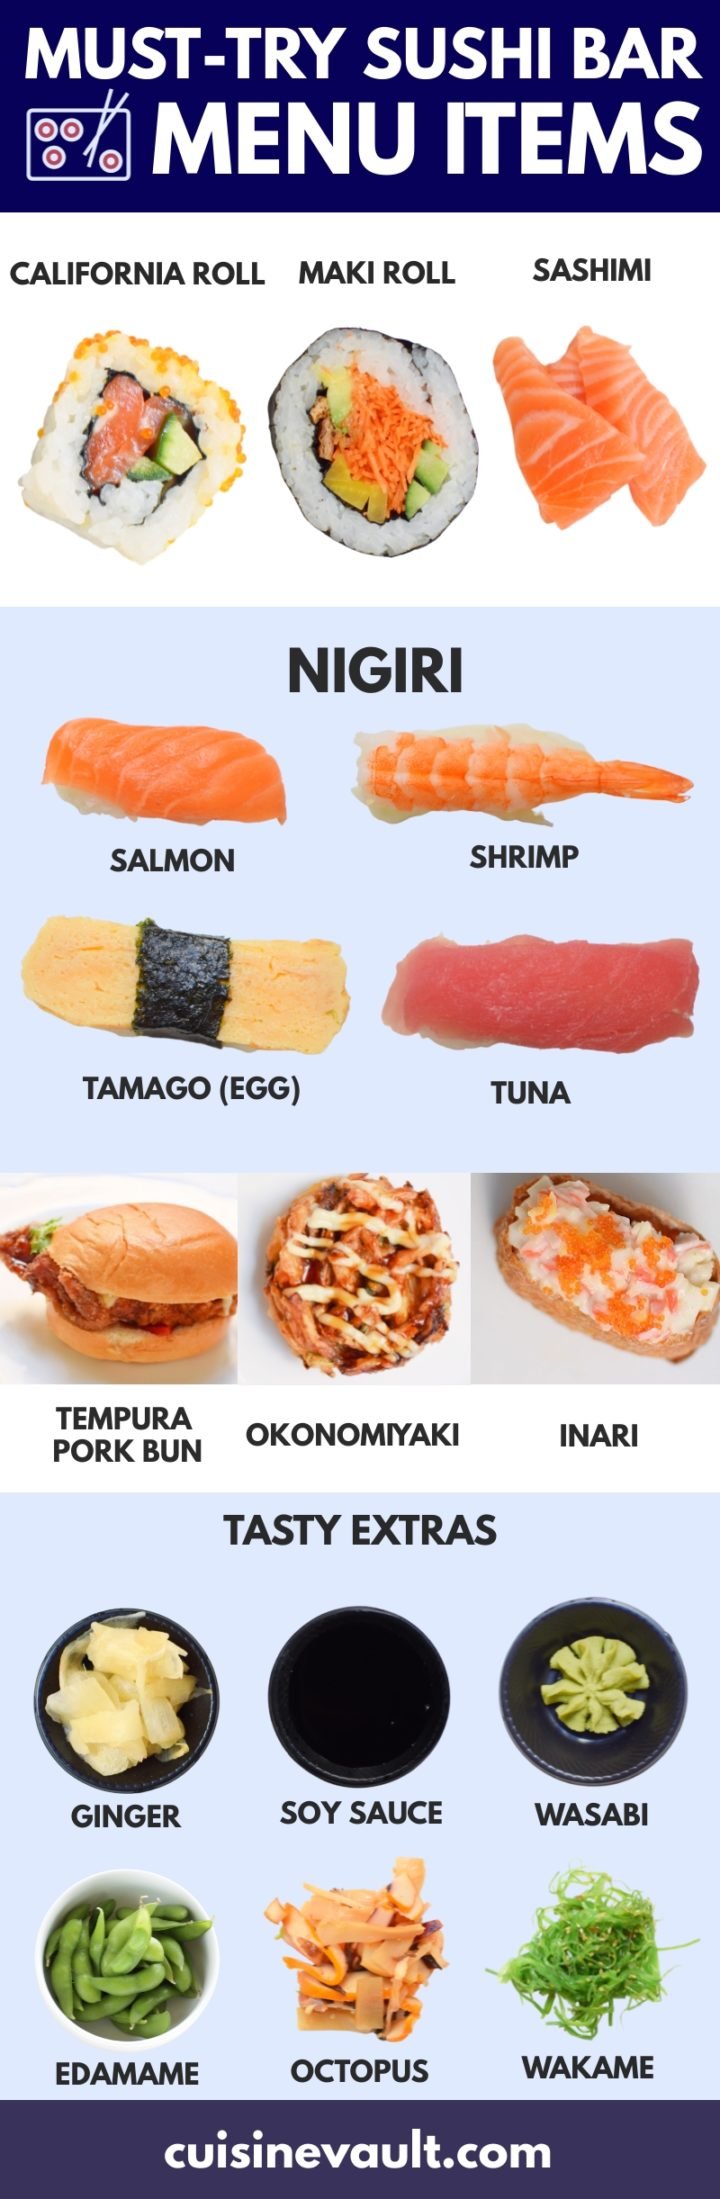 Popular Types Of Sushi The Ultimate List Tastylicious 2226